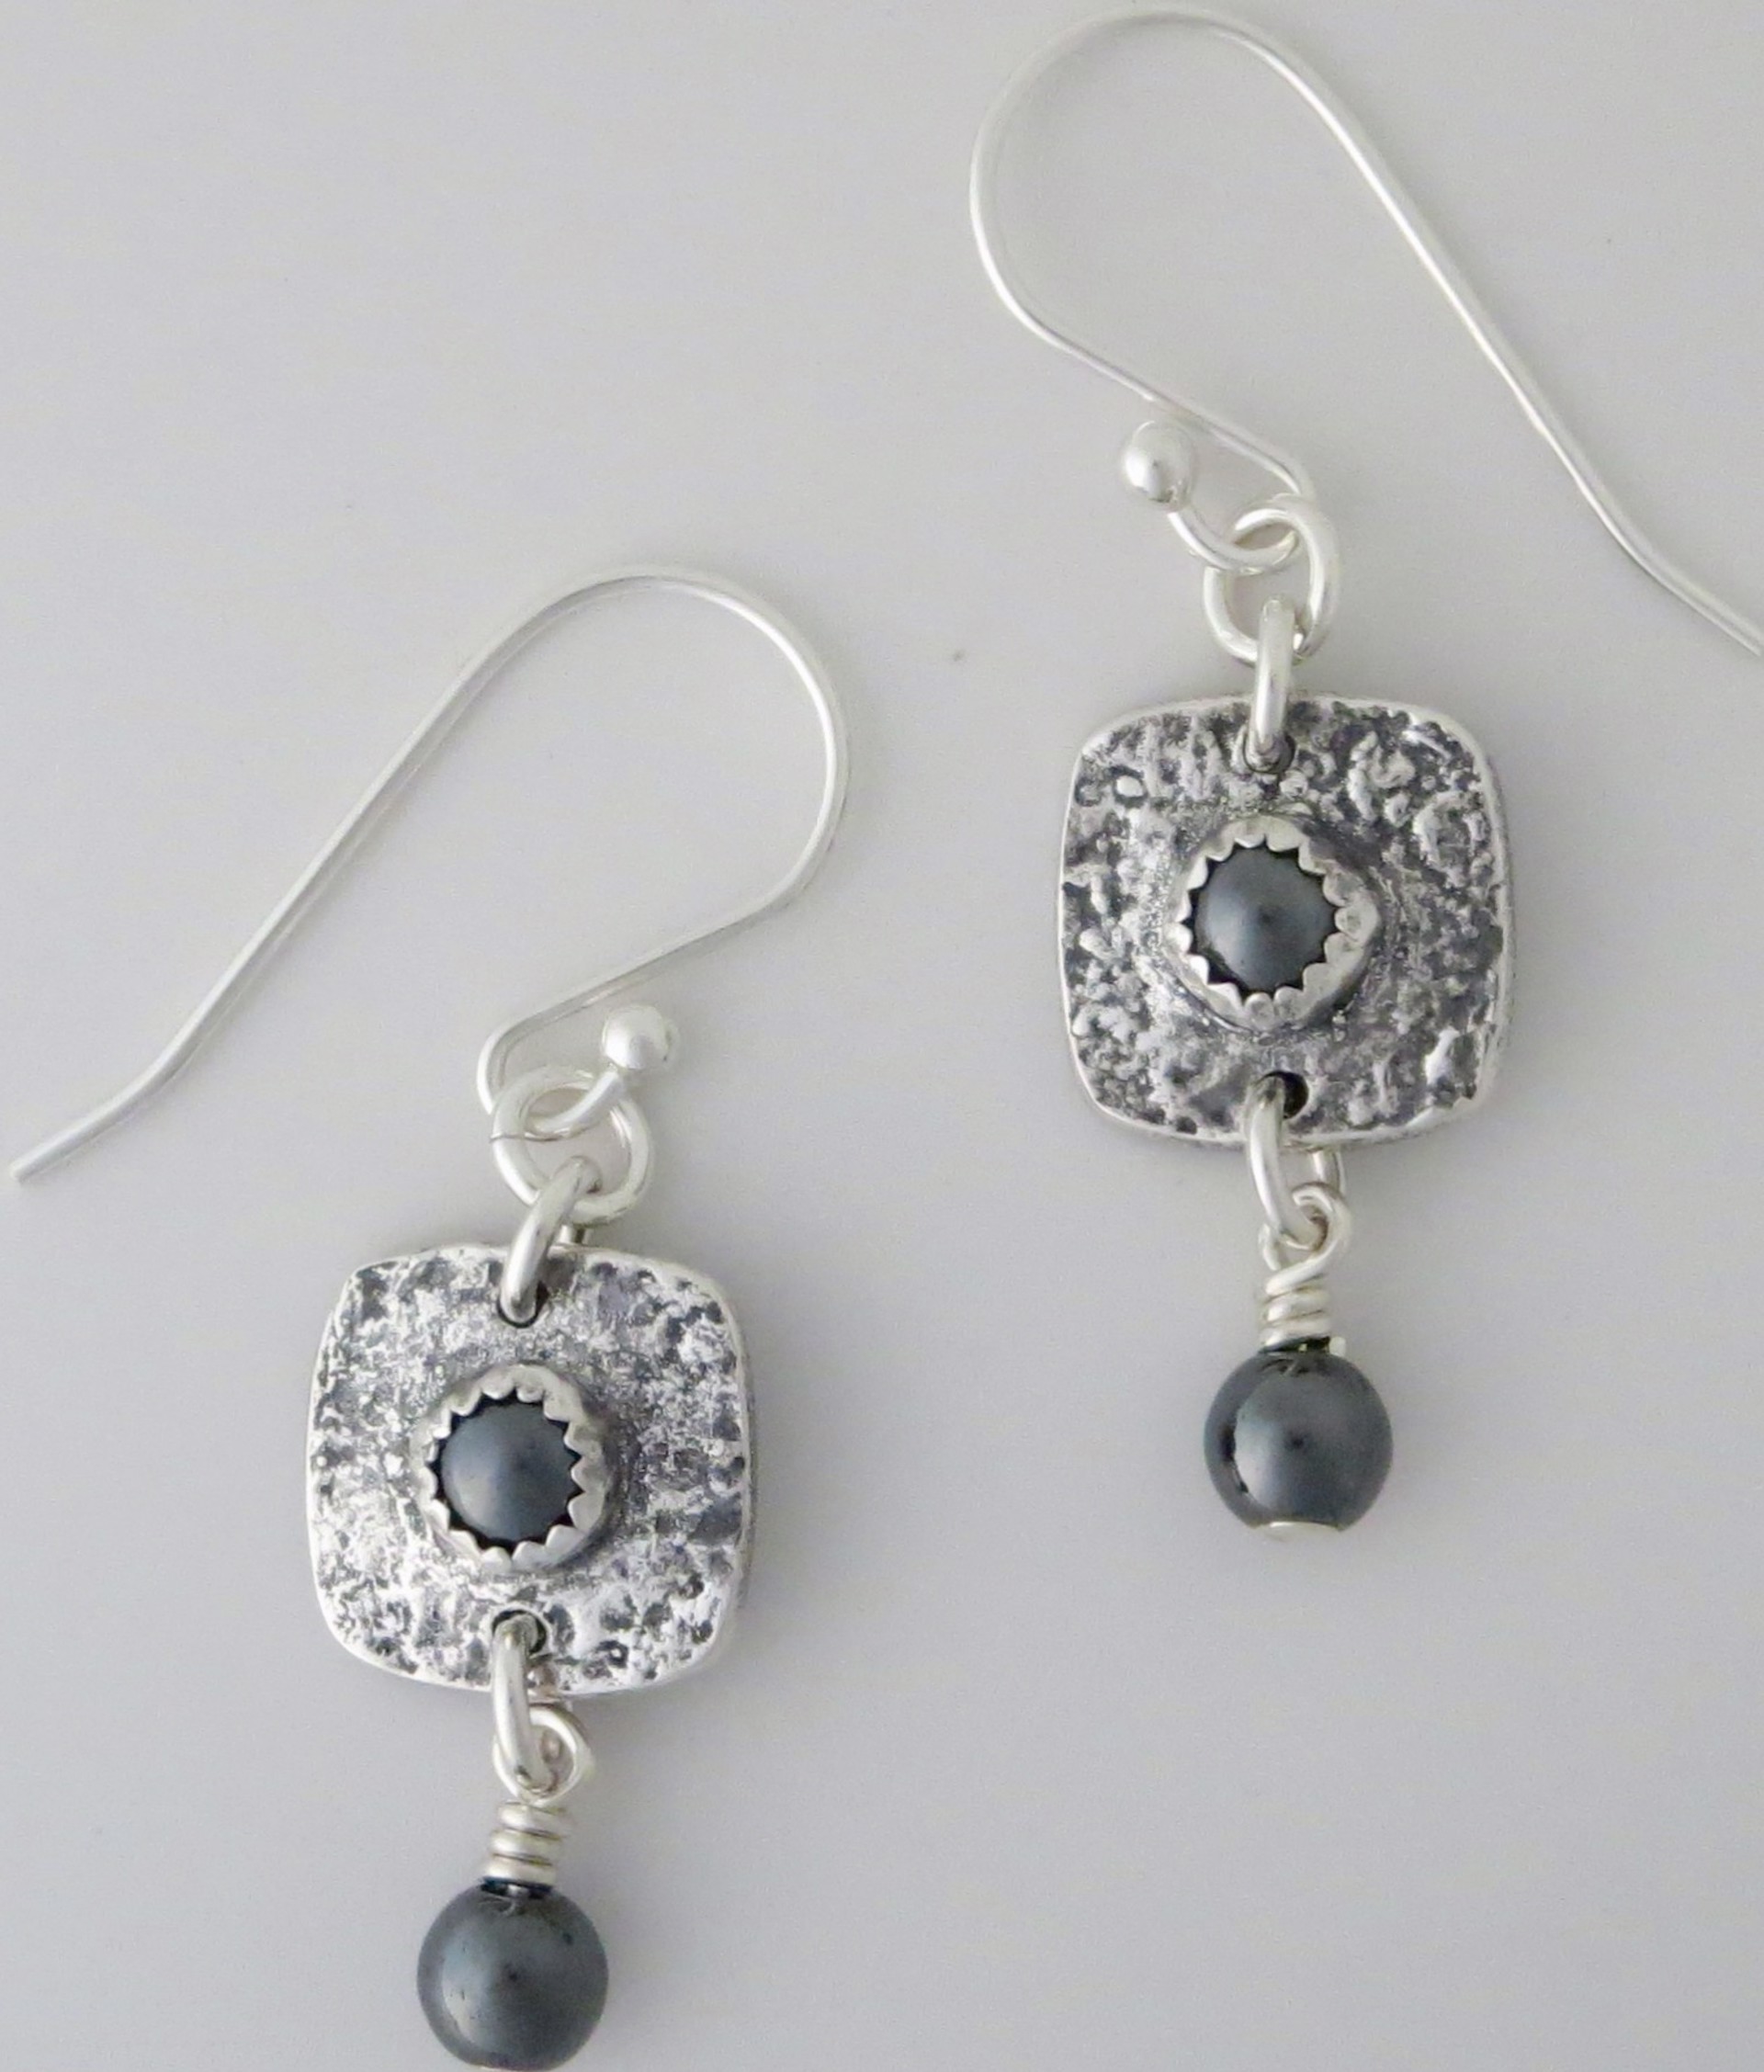 M-1005 Earrings by Donna Rittorno